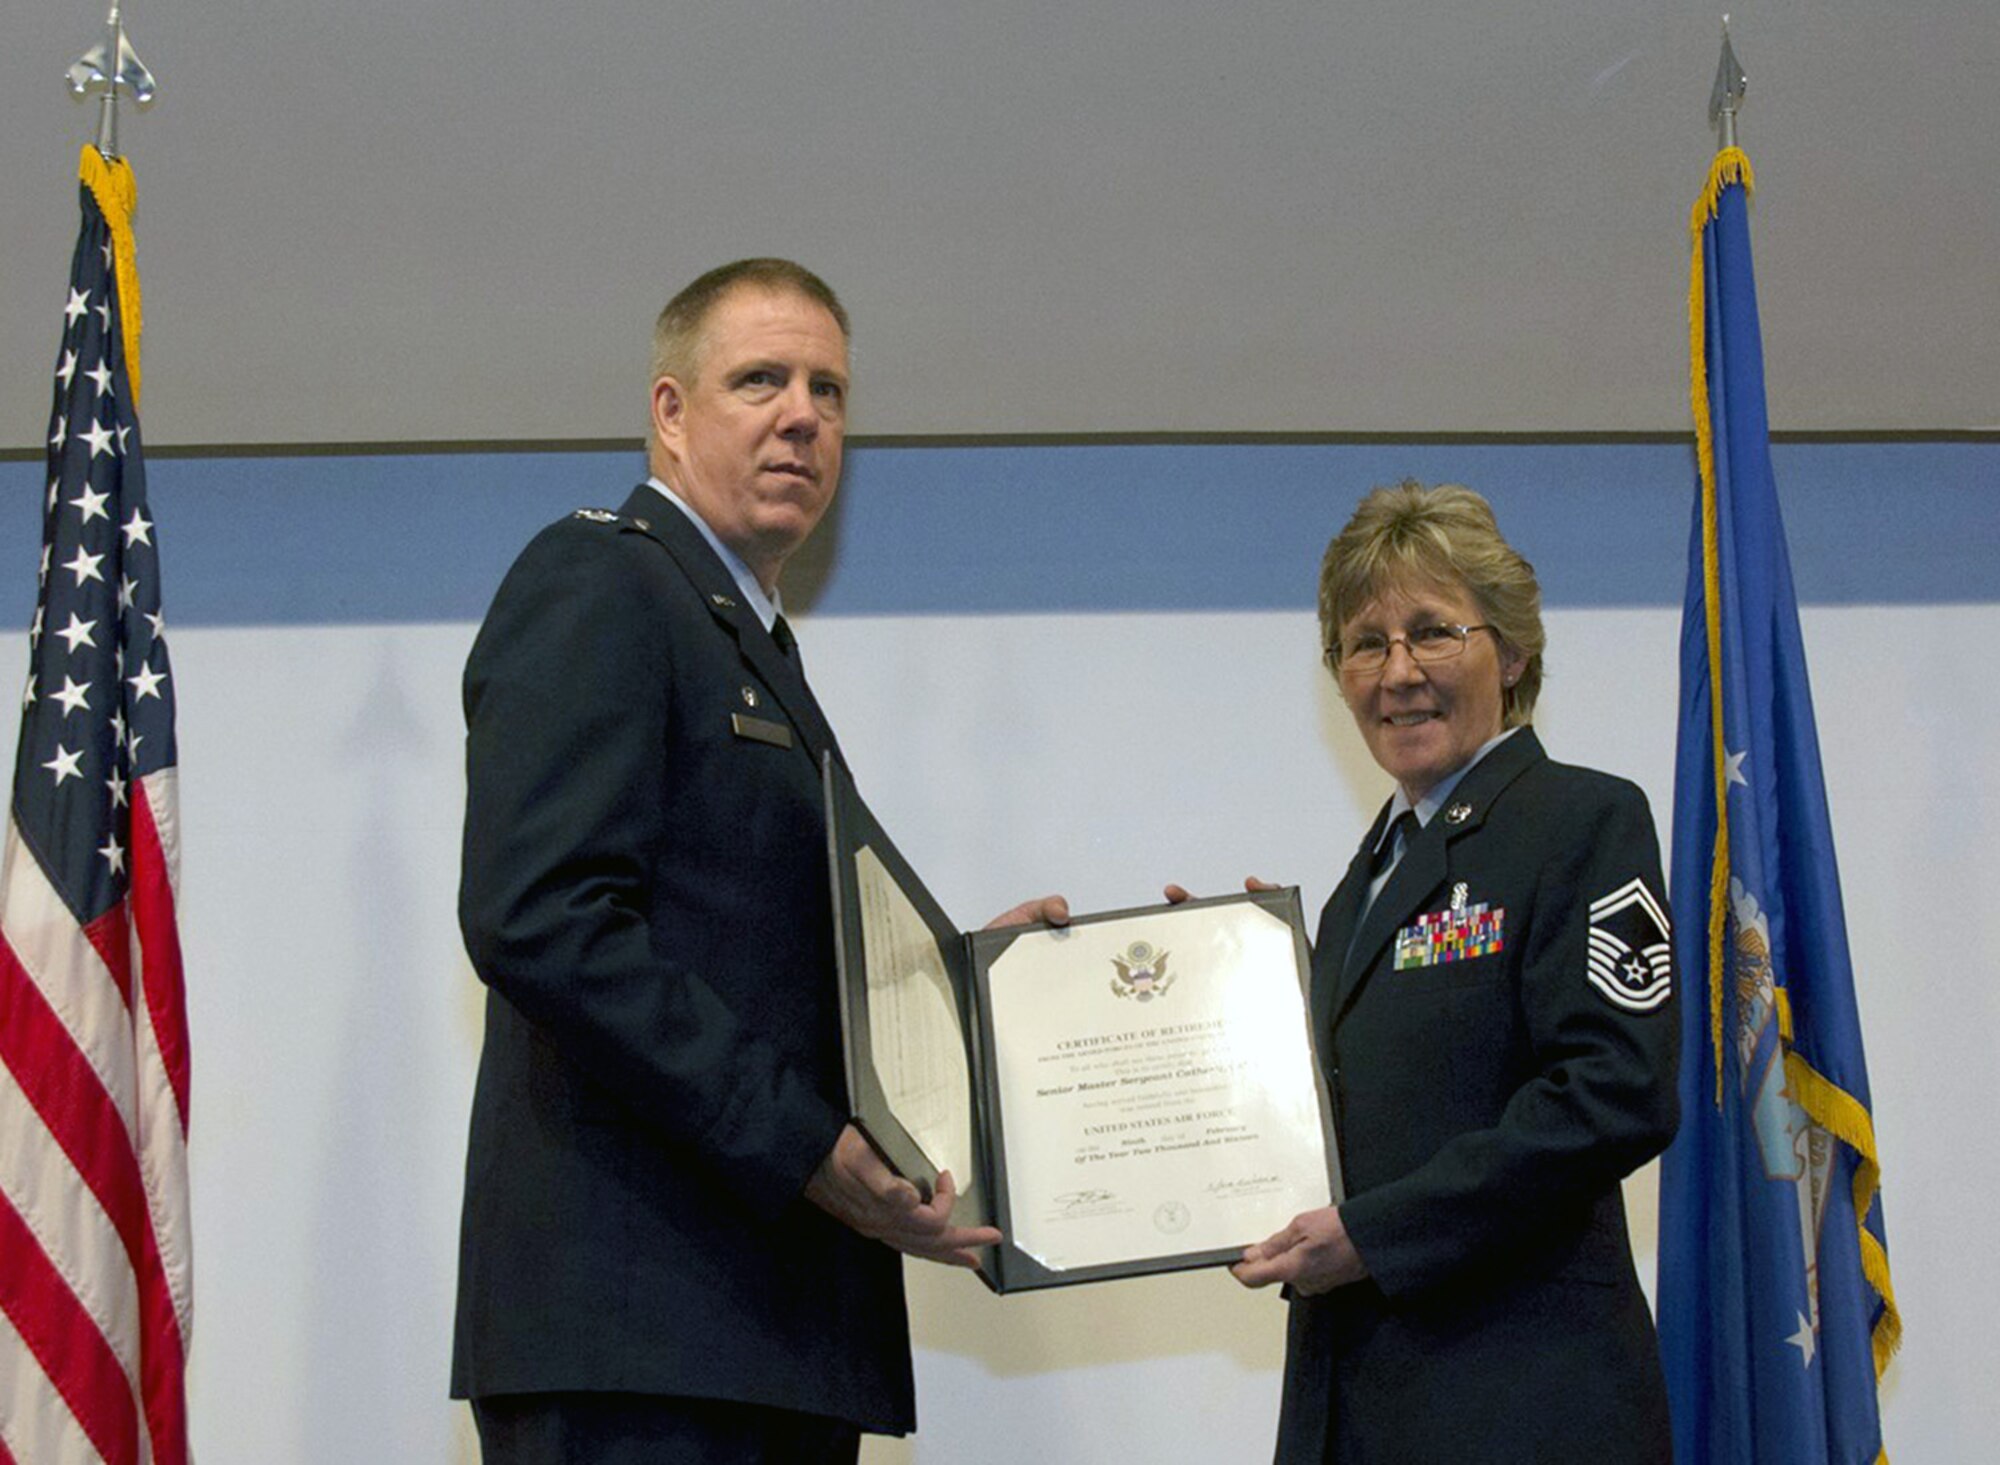 Senior Master Sgt. Catherine Goff, 349th Medical Squadron medical admin specialist, retires after 33 years of service split between the U.S. Air Force Reserve and the U.S. Army during a ceremony Jan. 9, 2016, at Travis Air Force Base, Calif. (U.S. Air Force photo/Airman 1st Class Shelby R. Horn)